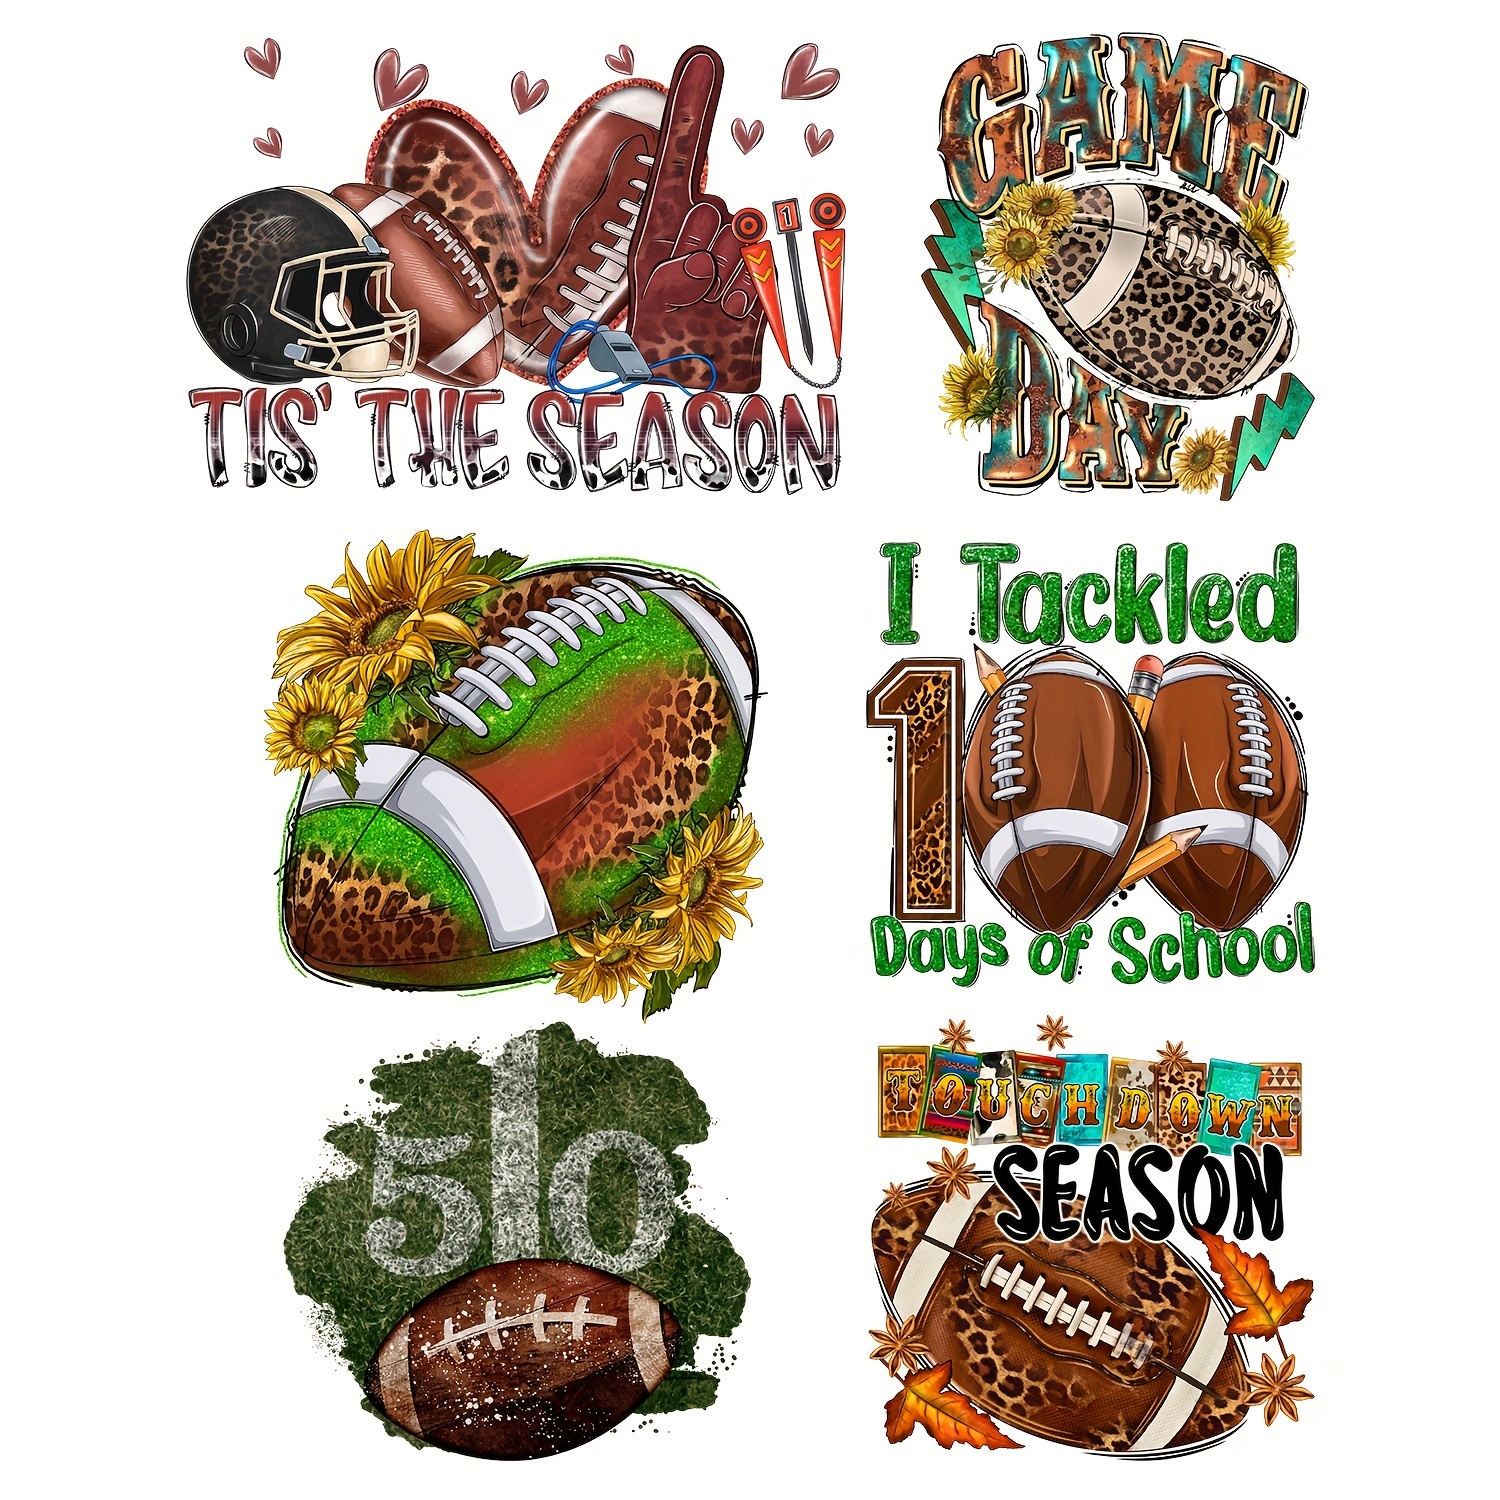 4pcs Rugby Iron on Patches for Clothing American Football Iron on Transfers Rugby Football Helmet Love Heart Iron on Decals for Clothes T-shirts